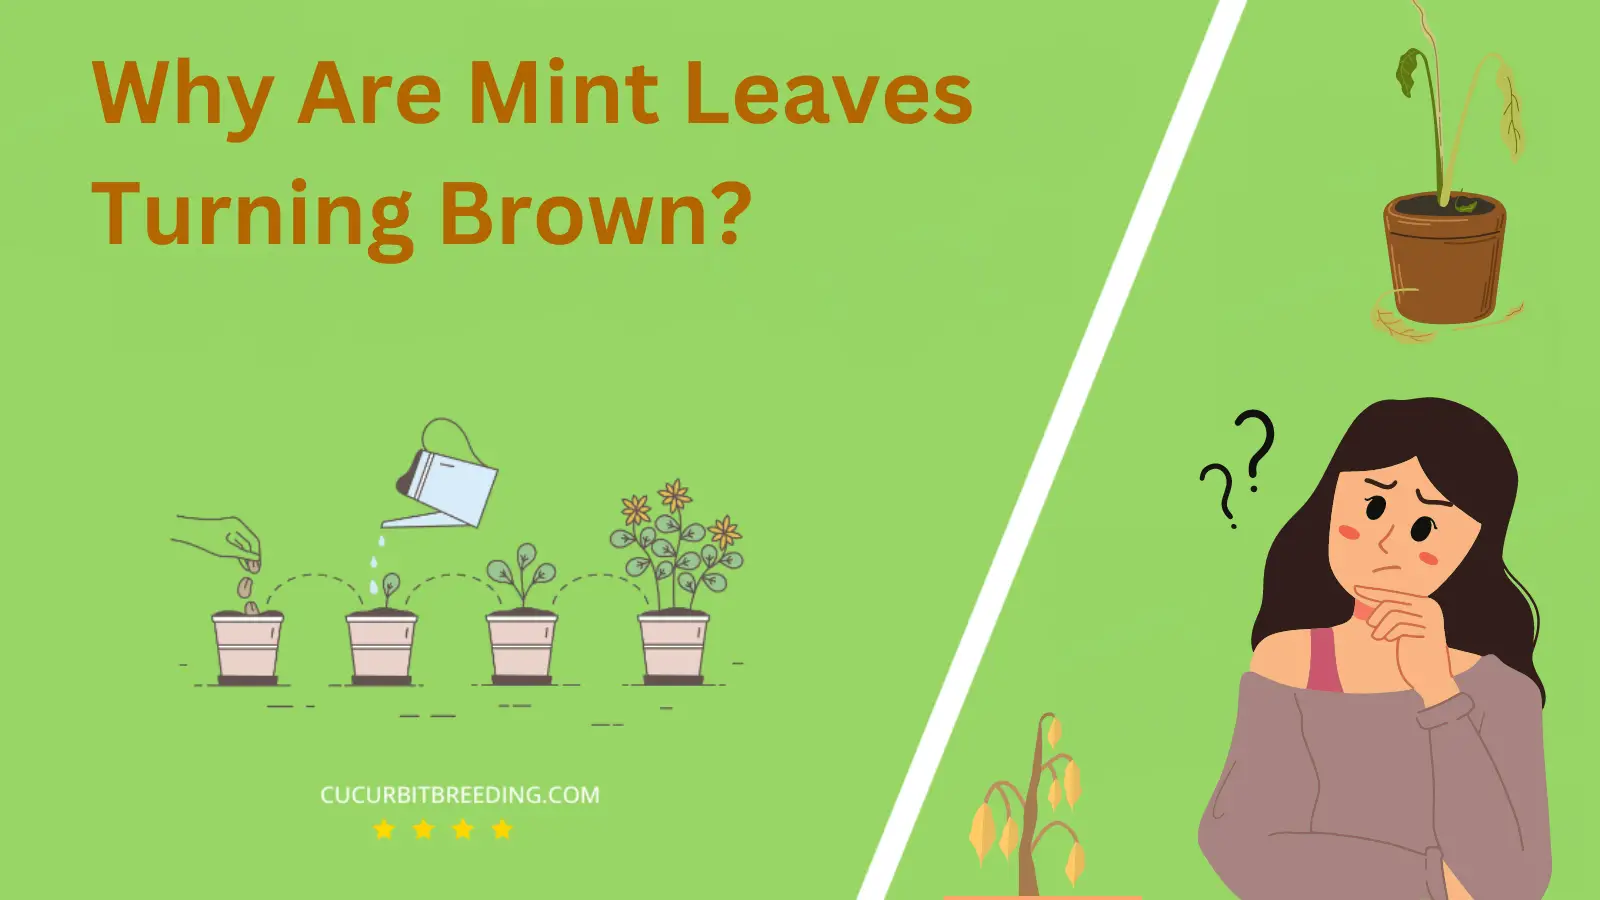 Why Are Mint Leaves Turning Brown